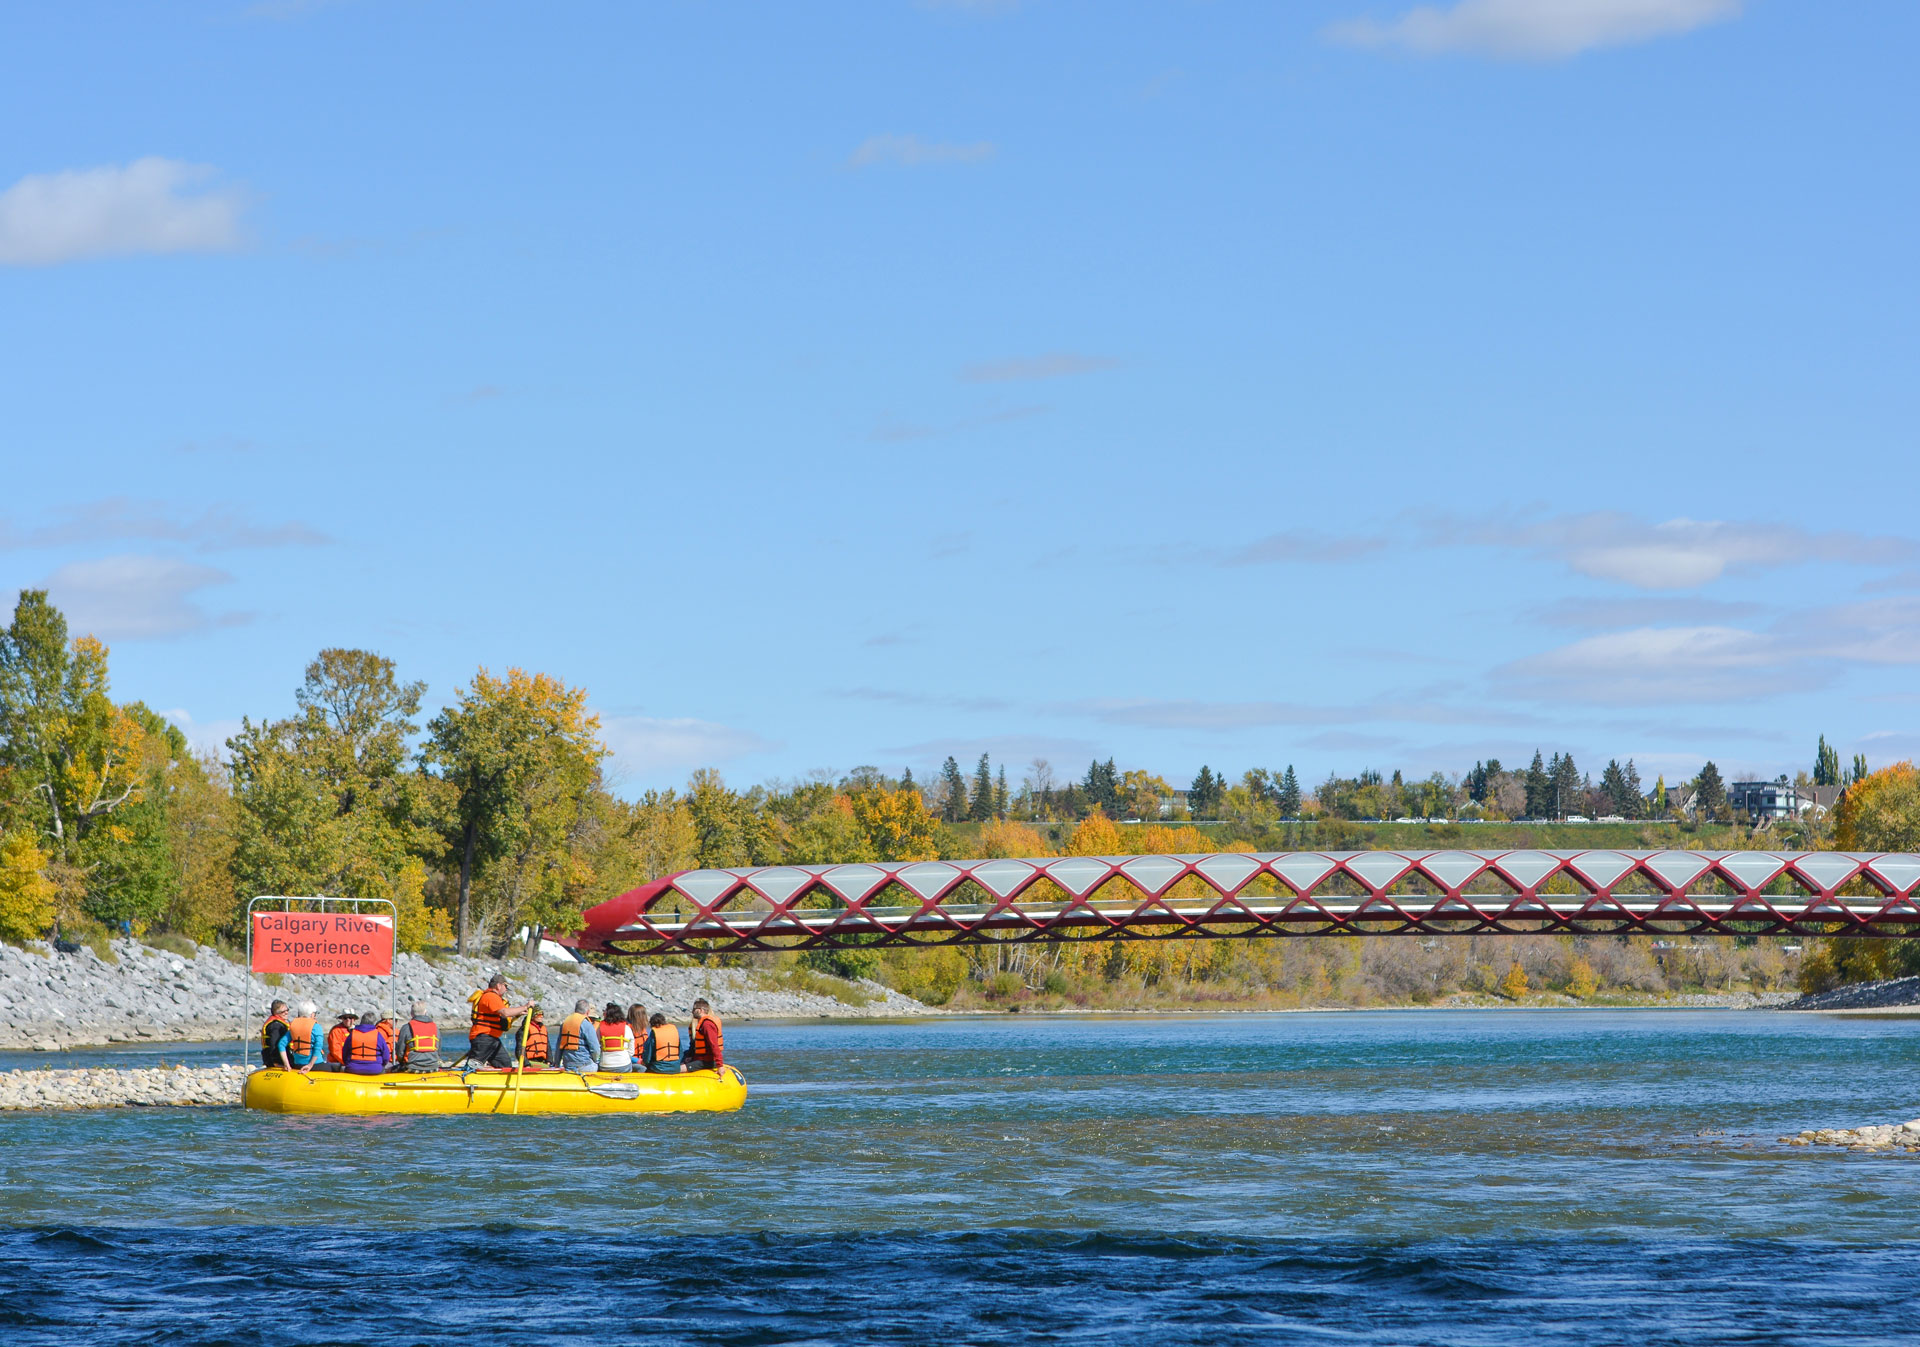 River rafting in Calgary with the Calgary River Experience (Photo credit: Travel Alberta/Caitlyn Giorgio).